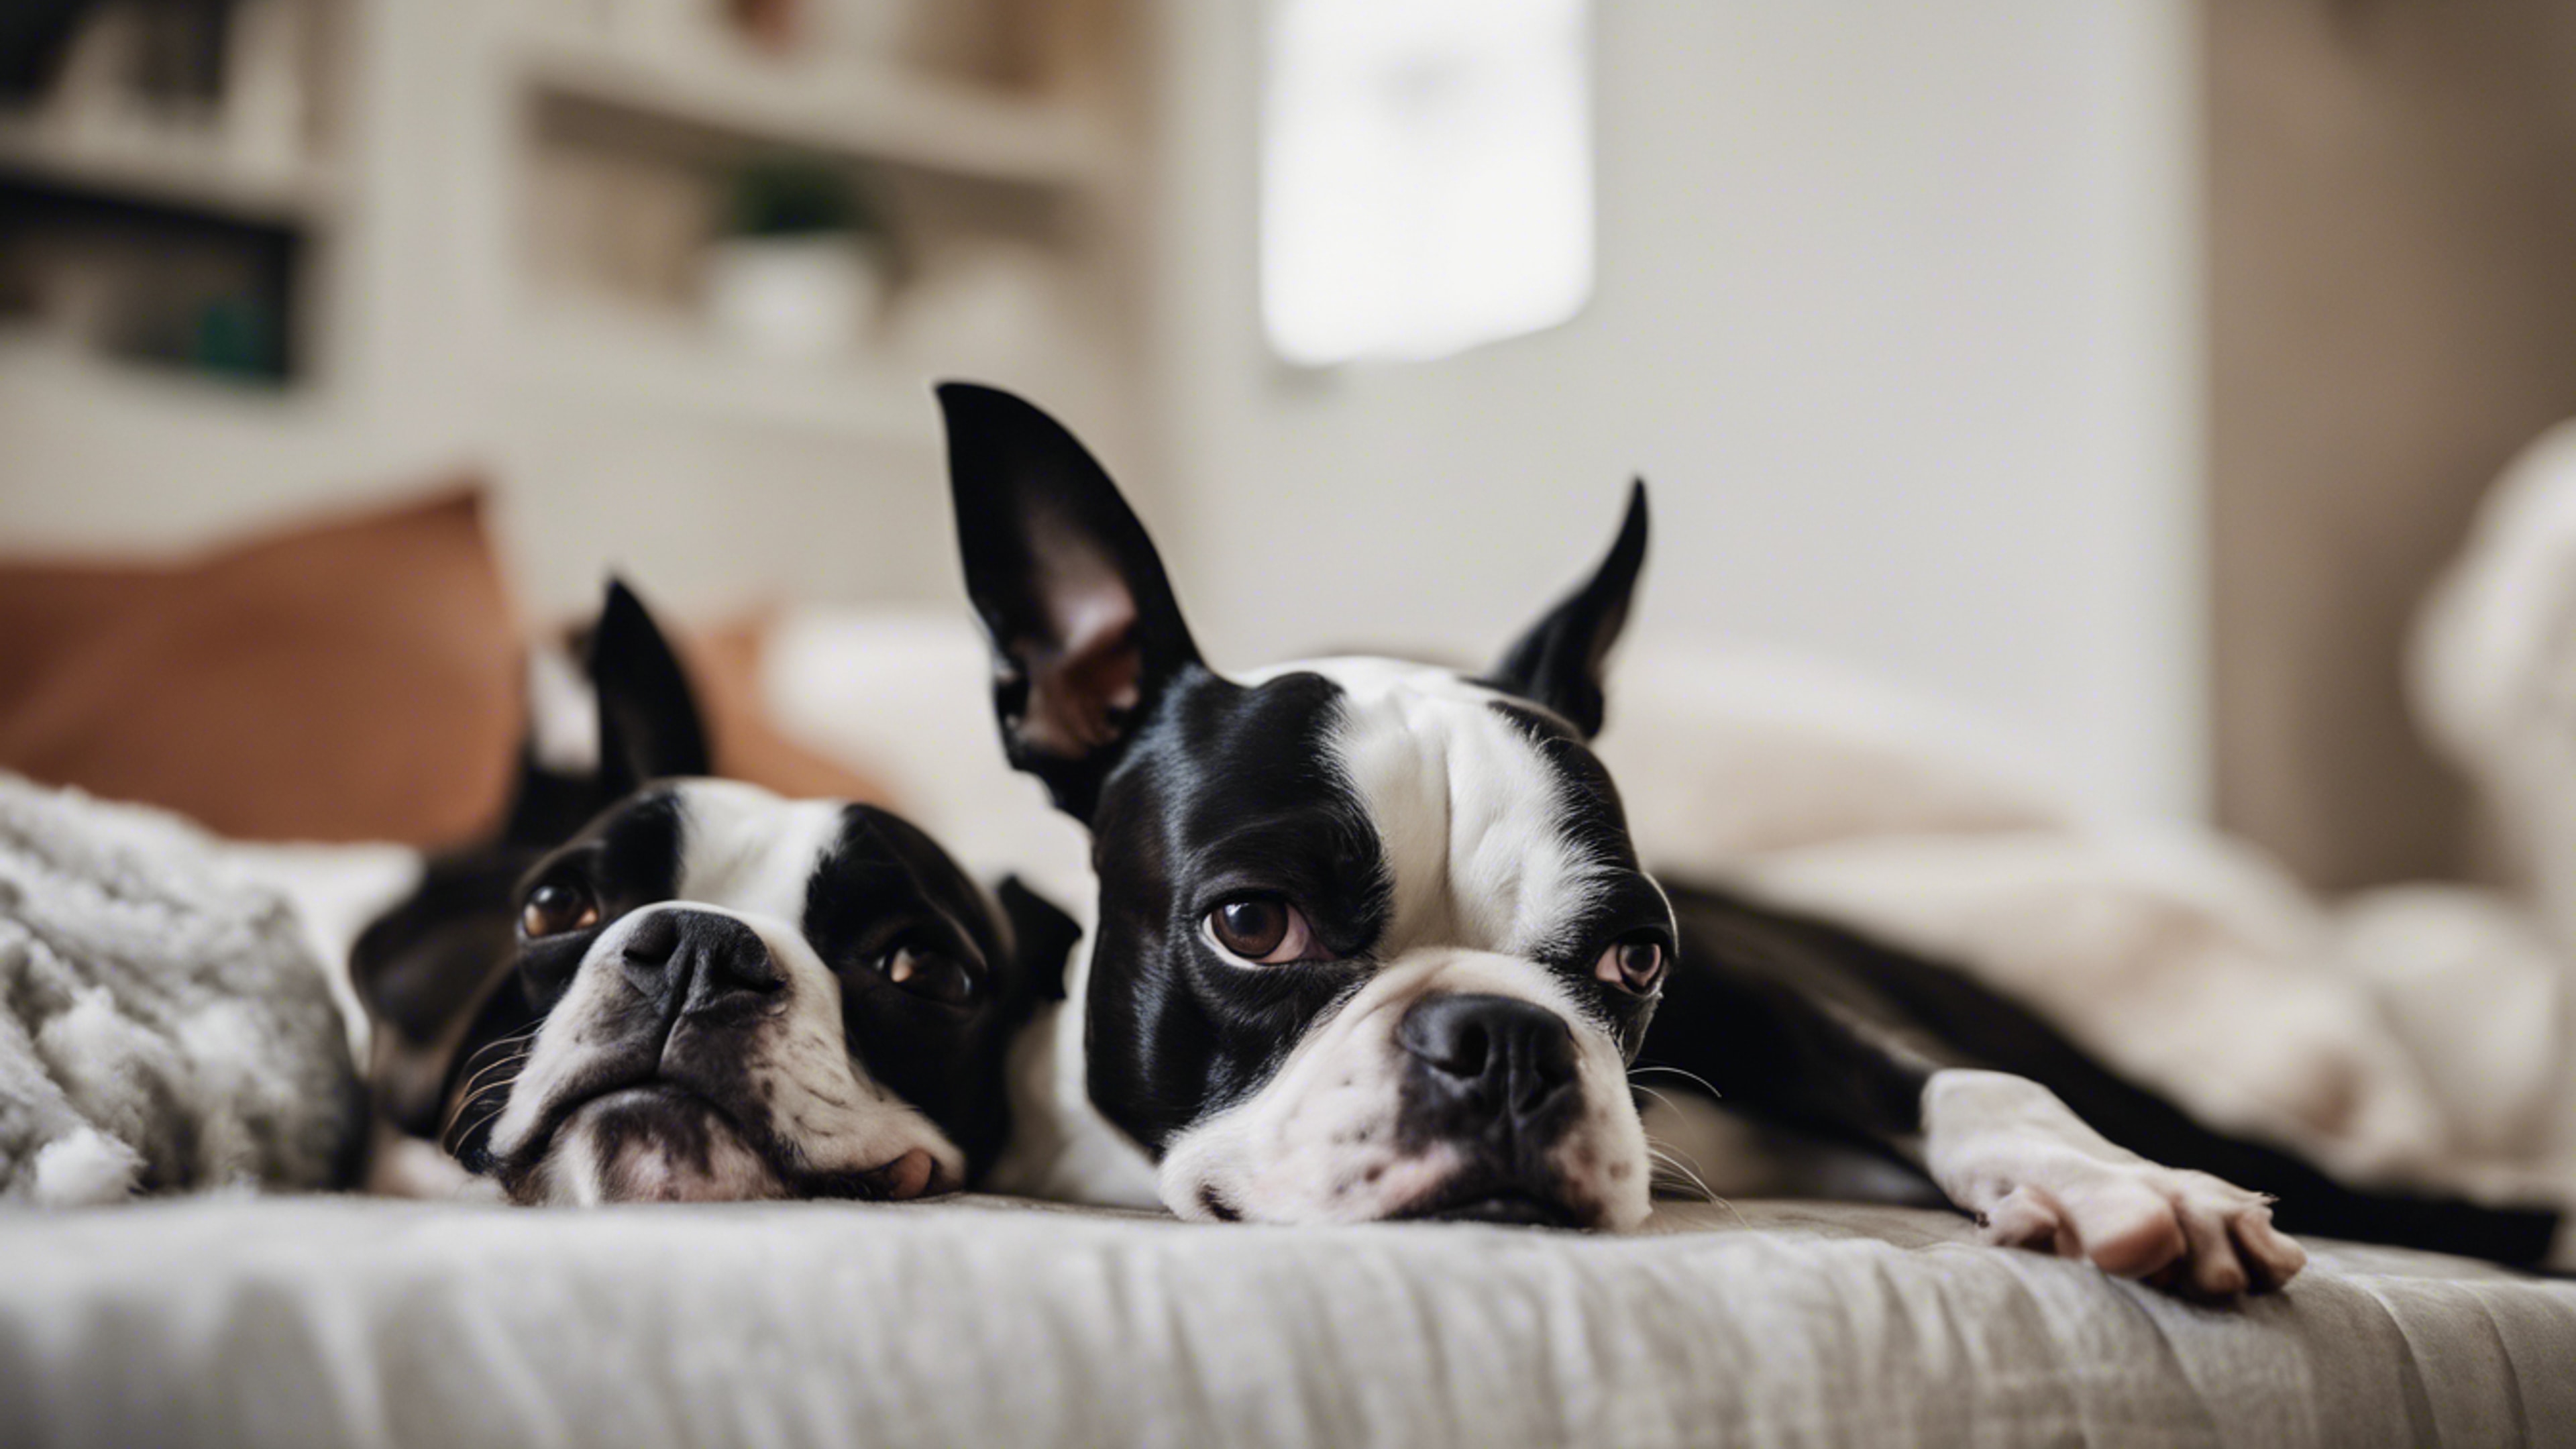 Two Boston Terriers laying comfortably on their sides, dozing away the afternoon in a suburban home. Wallpaper[f1fad920e9554f308ac1]